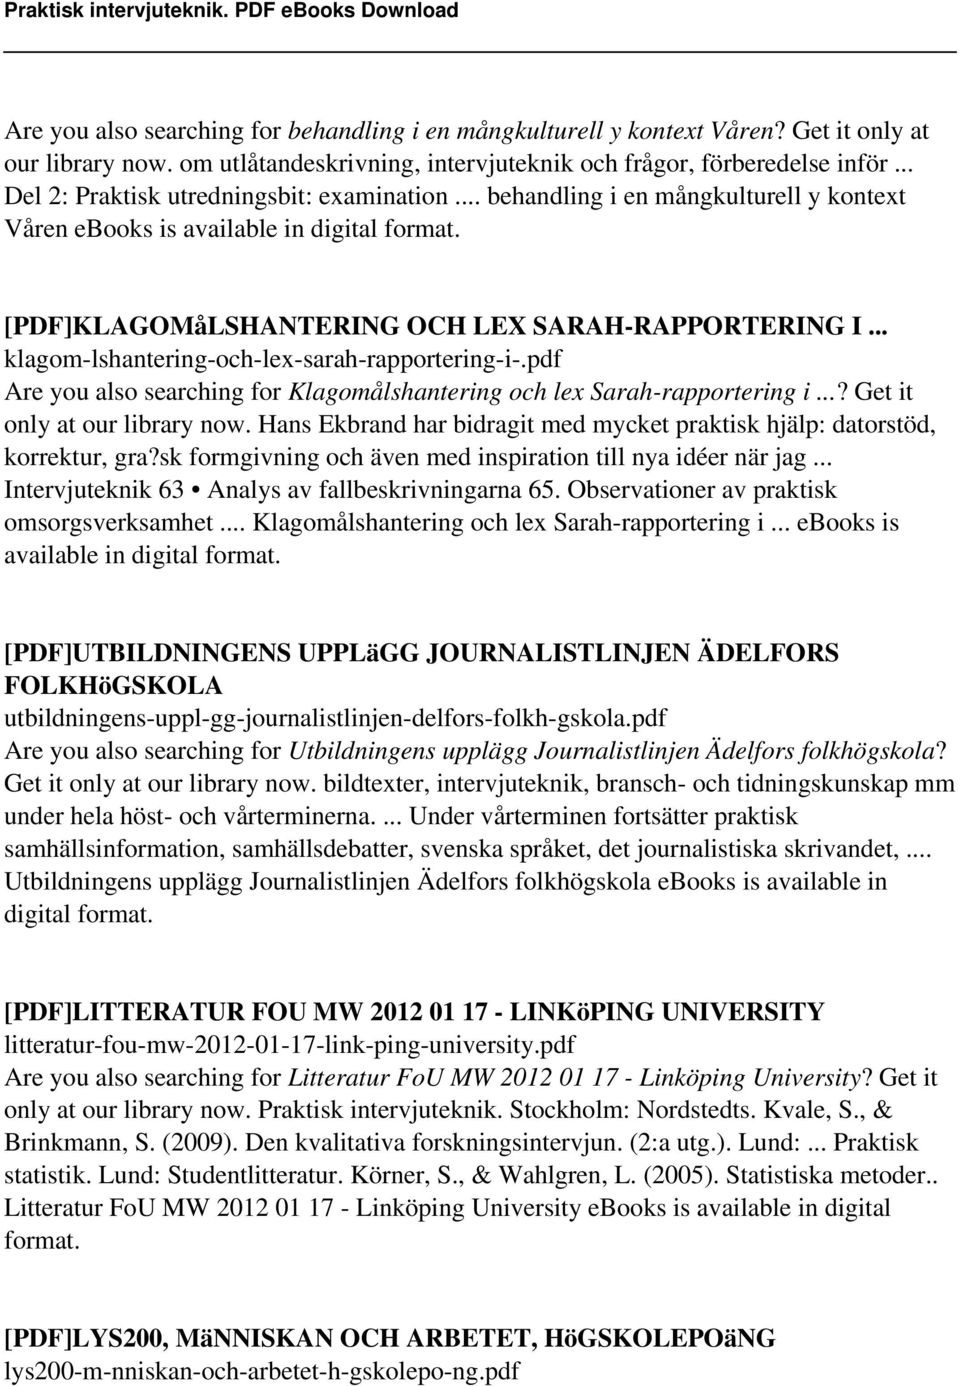 .. klagom-lshantering-och-lex-sarah-rapportering-i-.pdf Are you also searching for Klagomålshantering och lex Sarah-rapportering i...? Get it only at our library now.